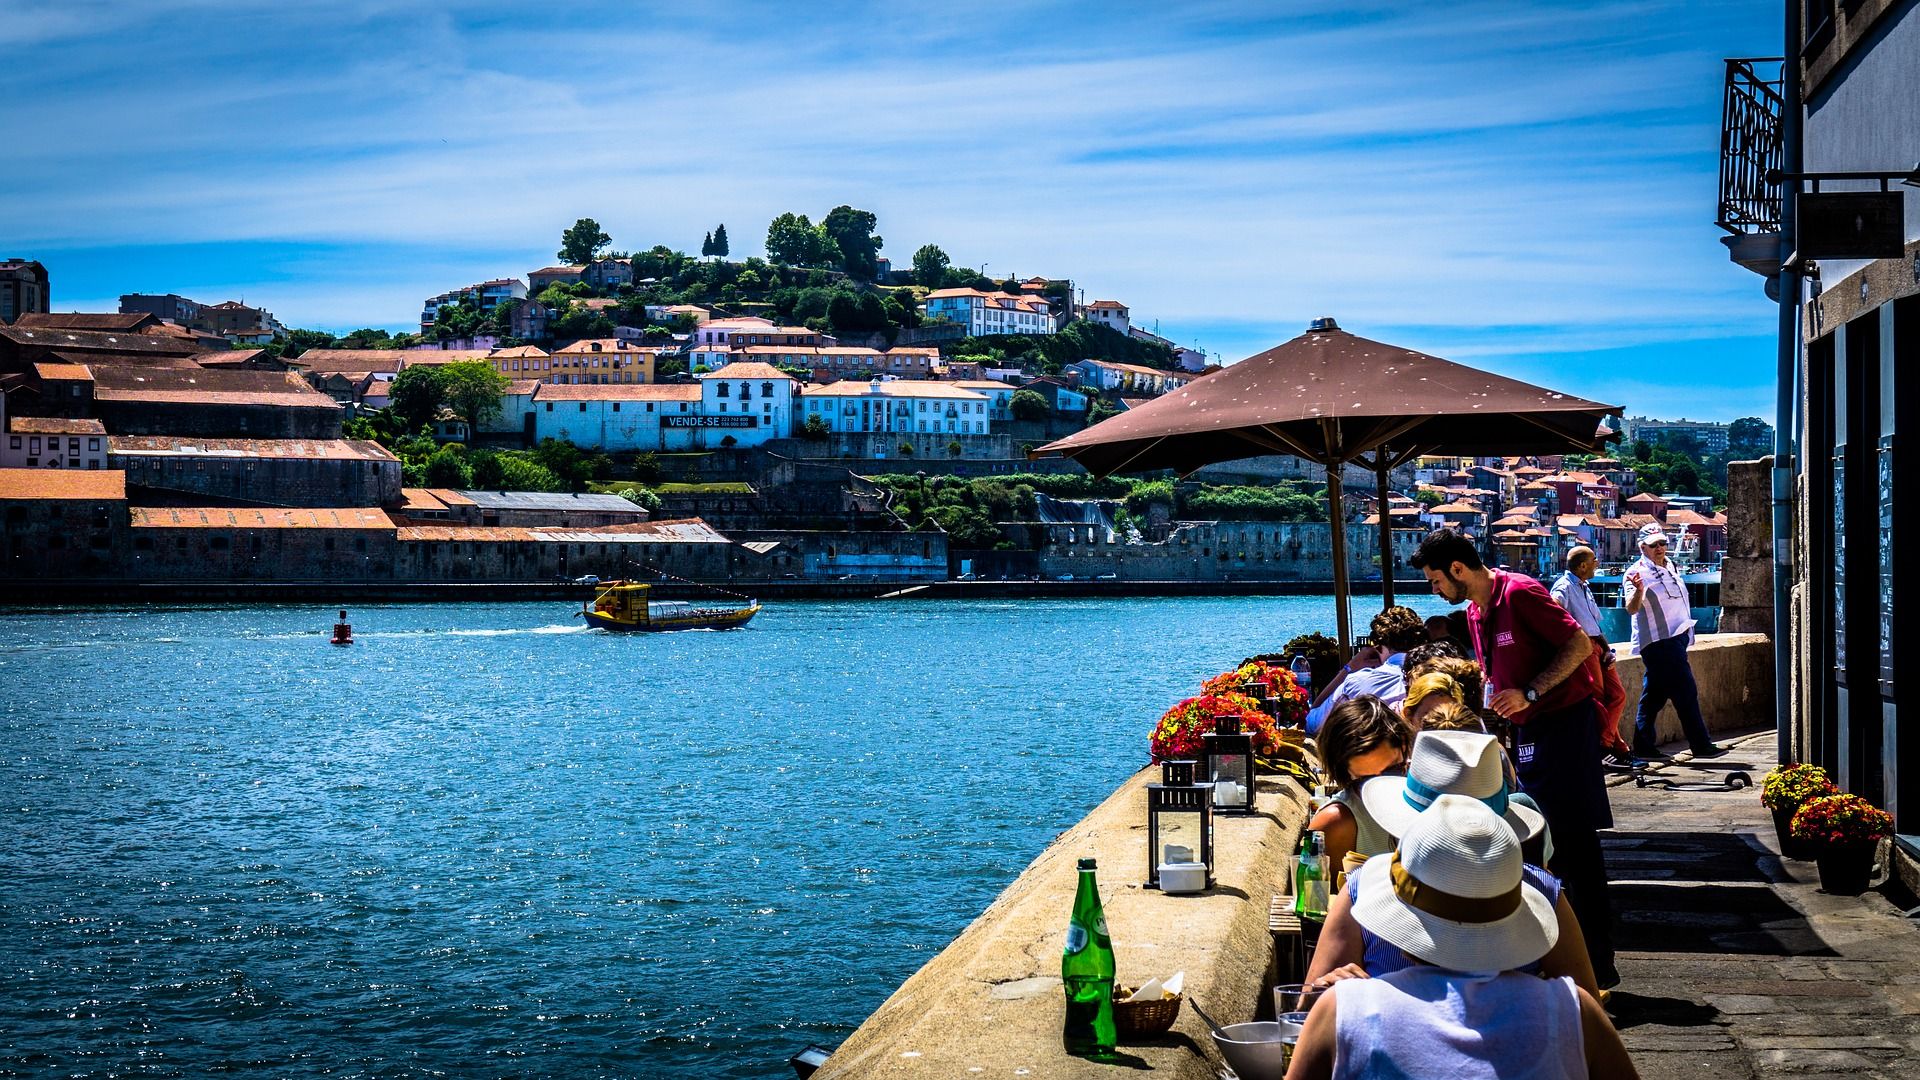 View of the riverside area of the city with a rabelo boat, used for centuries to transport supplies and port wine along the Douro River.